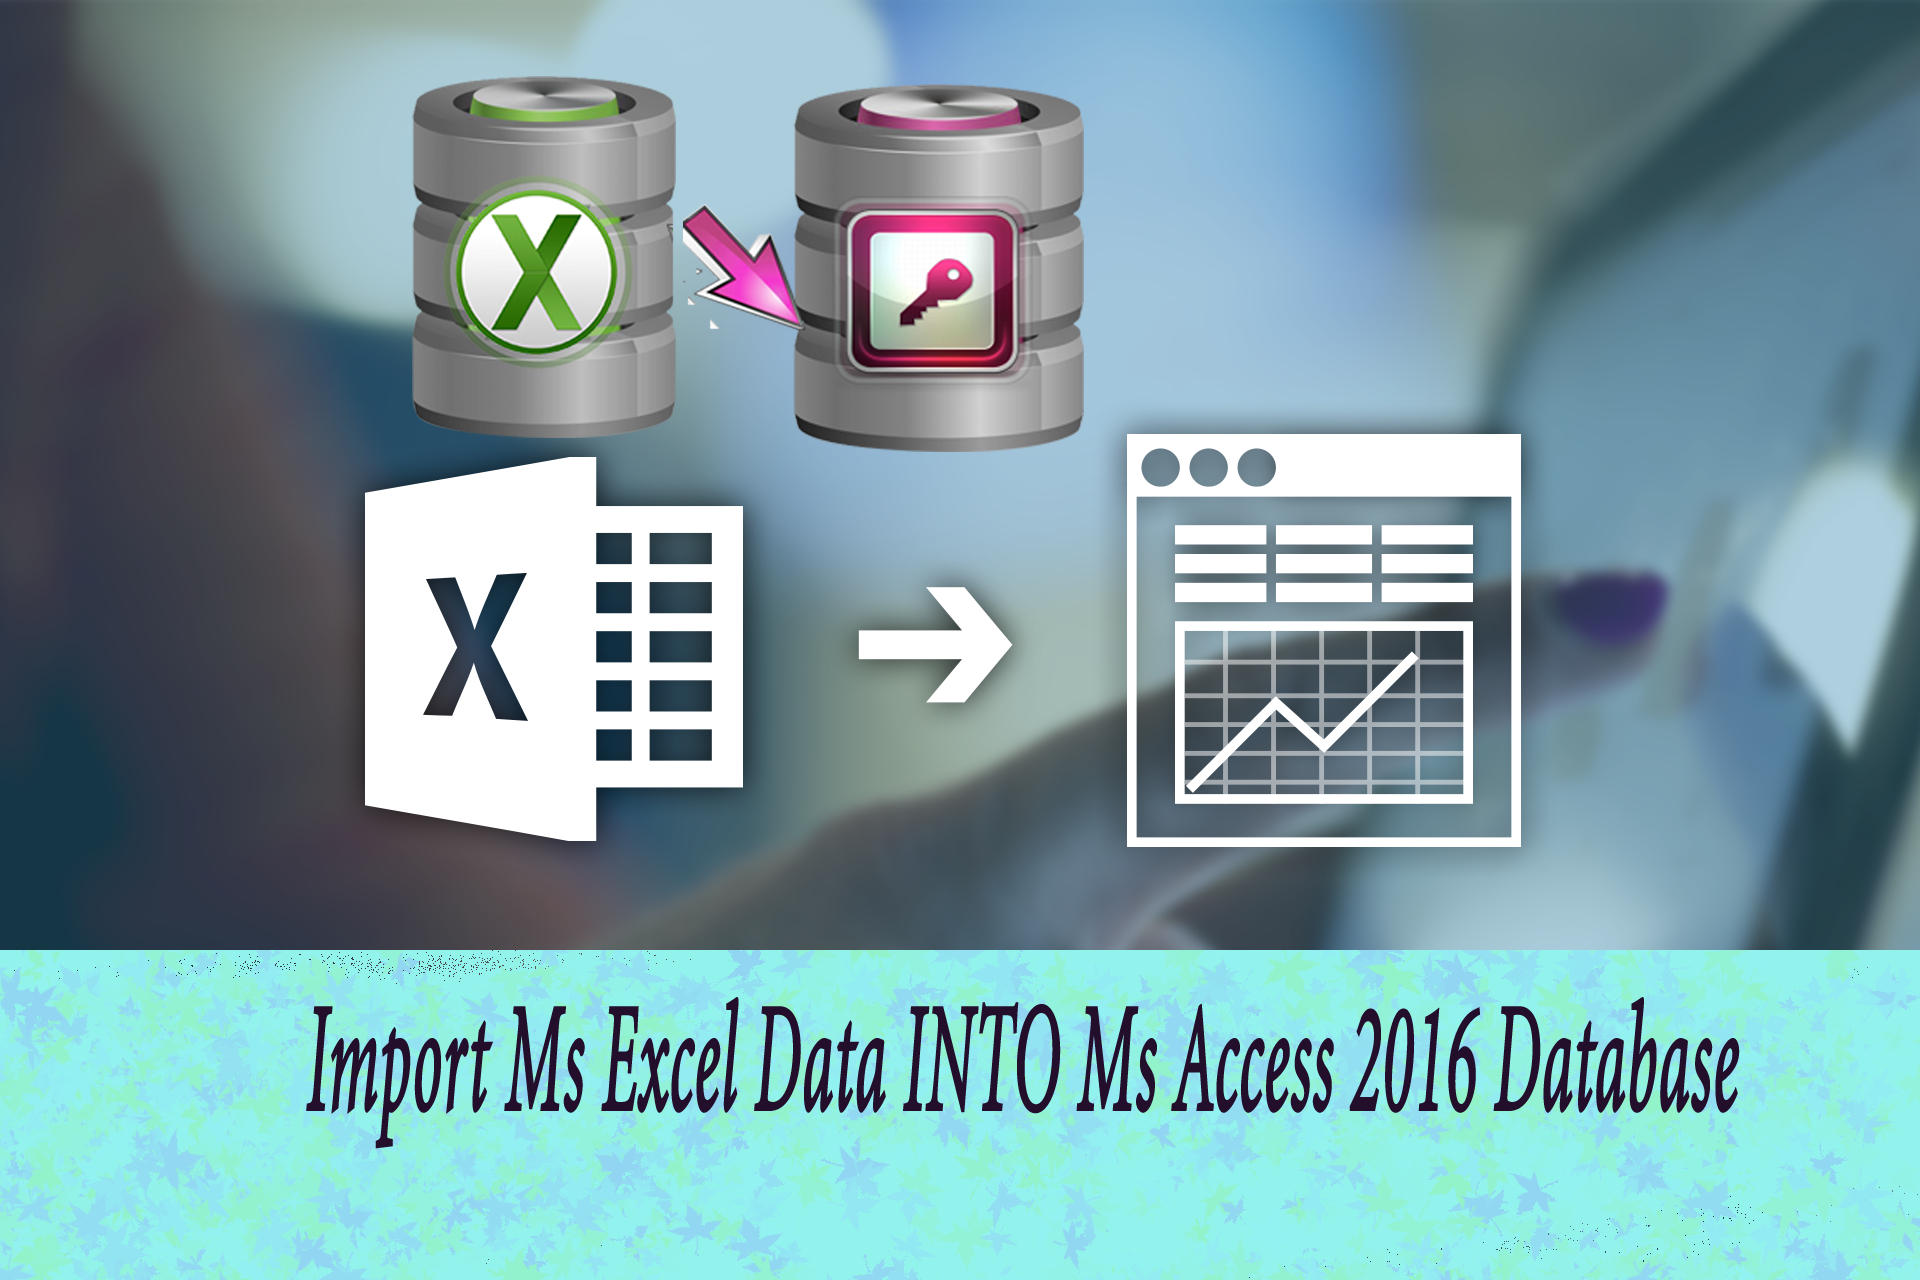 Convert Excel Spreadsheet To Access Database 2016 inside How To Import Or Link Ms Excel Data Into Ms Access 2016/2013/2010